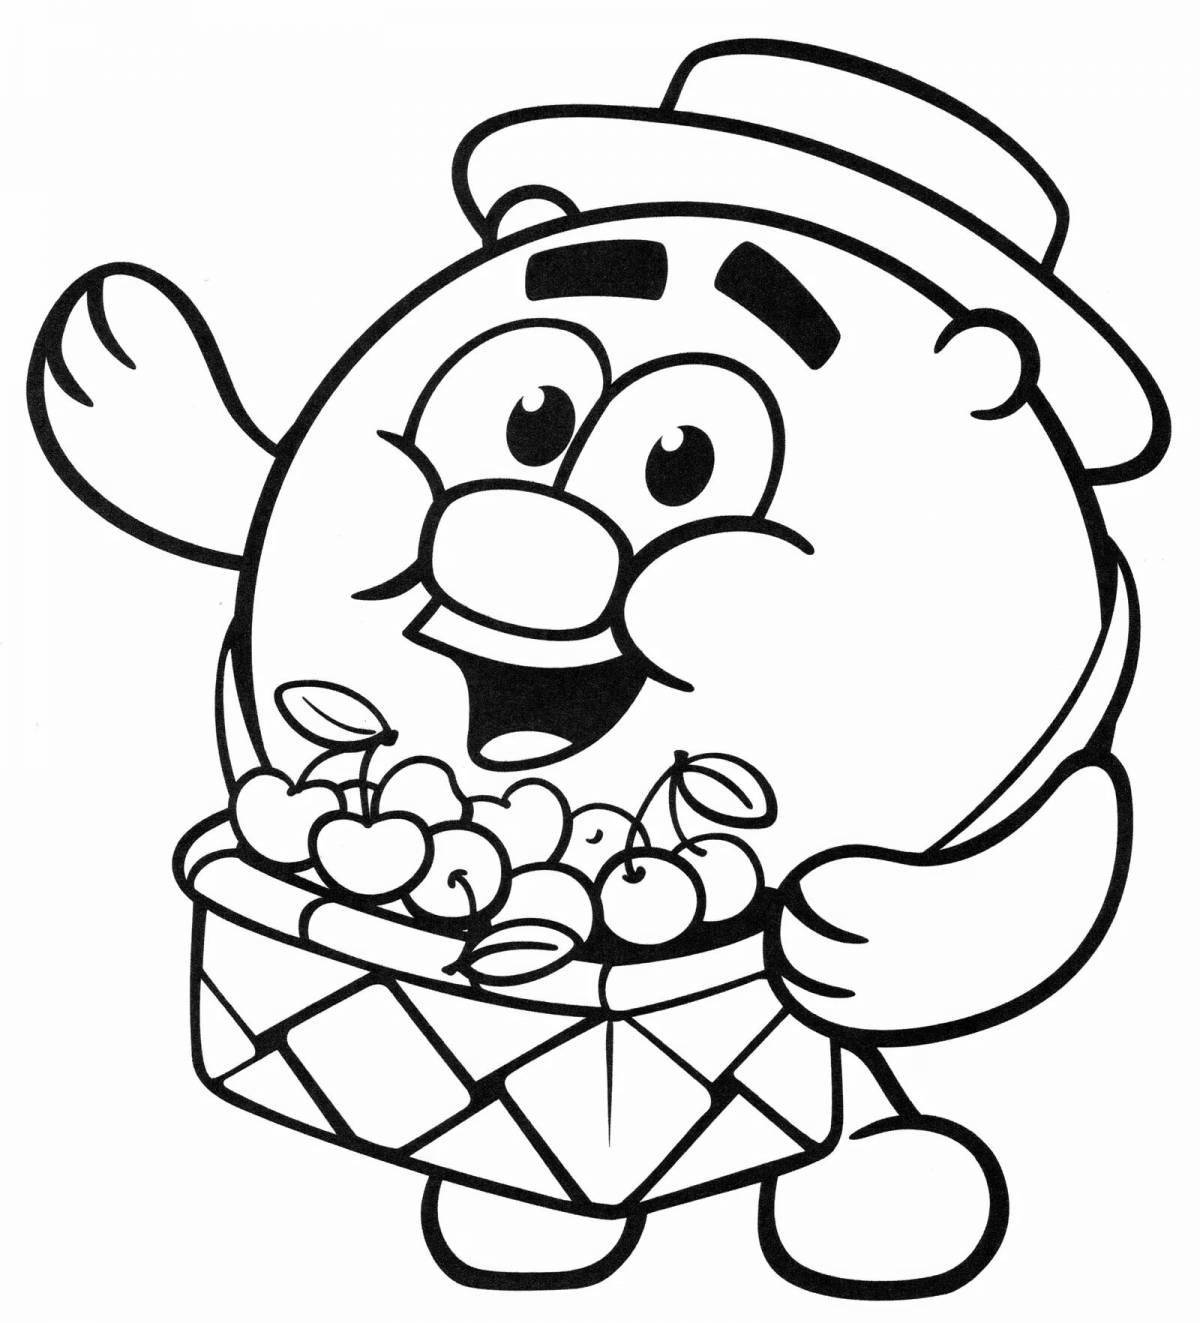 Playful smeshariki coloring pages for kids